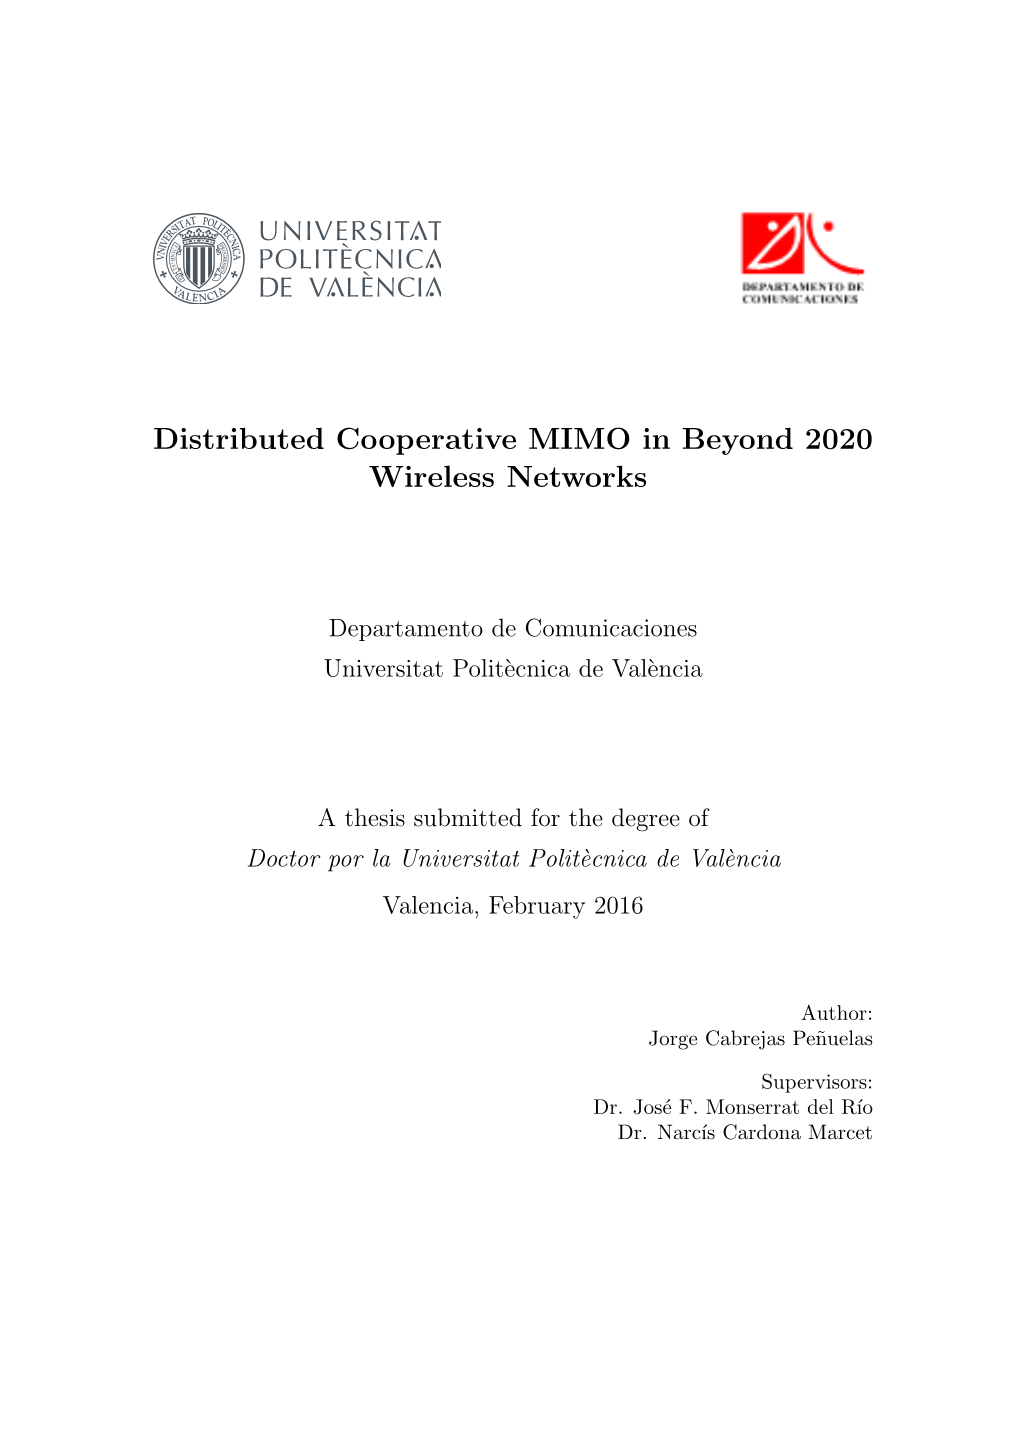 Distributed Cooperative MIMO in Beyond 2020 Wireless Networks